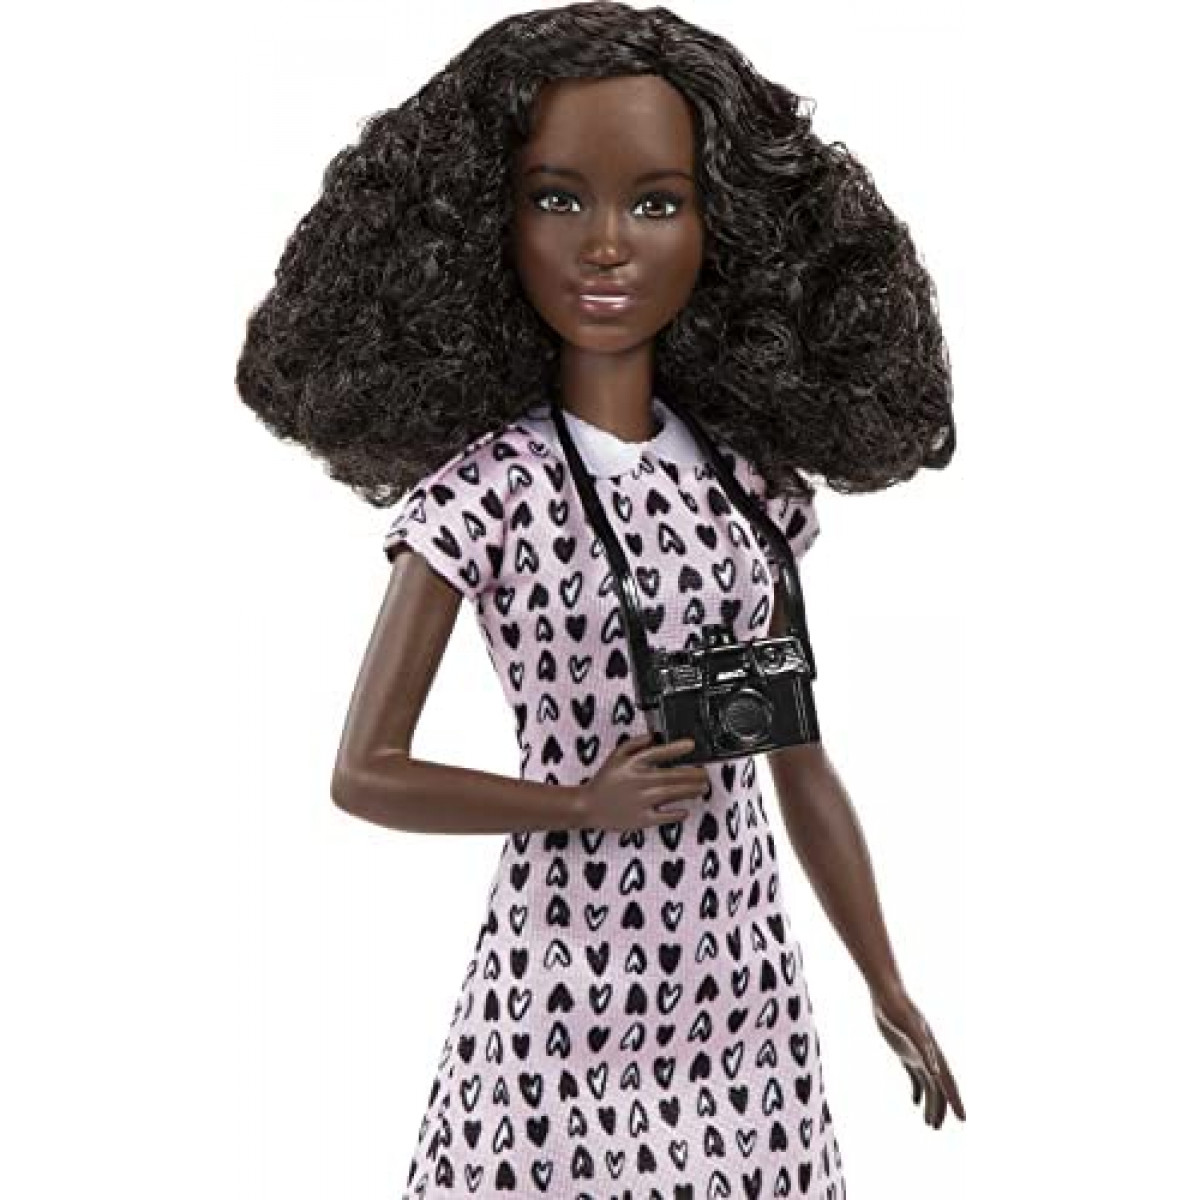 Barbie Photographer Doll (12 Inches), Petite Brunette